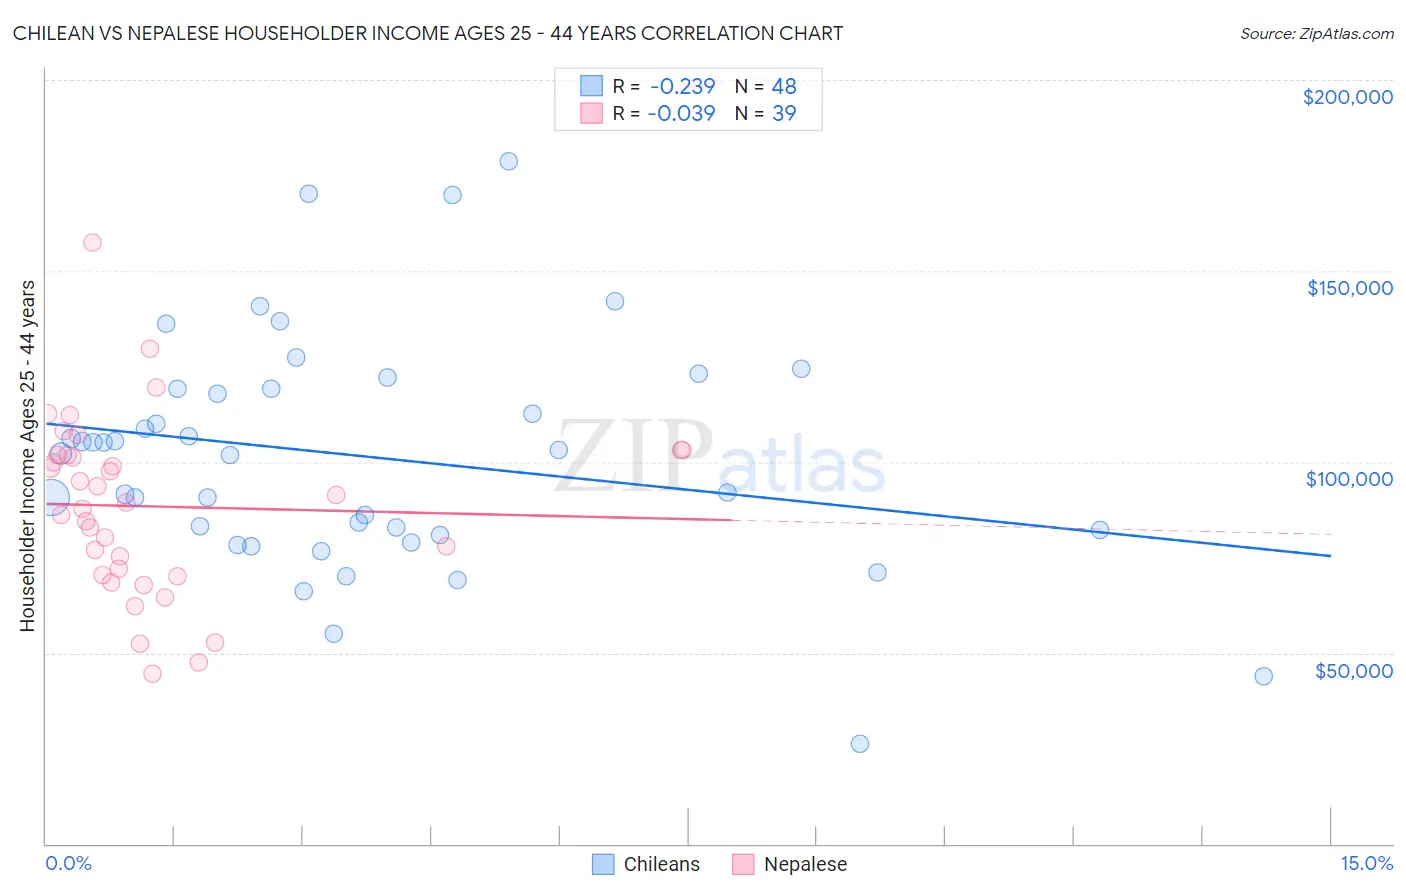 Chilean vs Nepalese Householder Income Ages 25 - 44 years